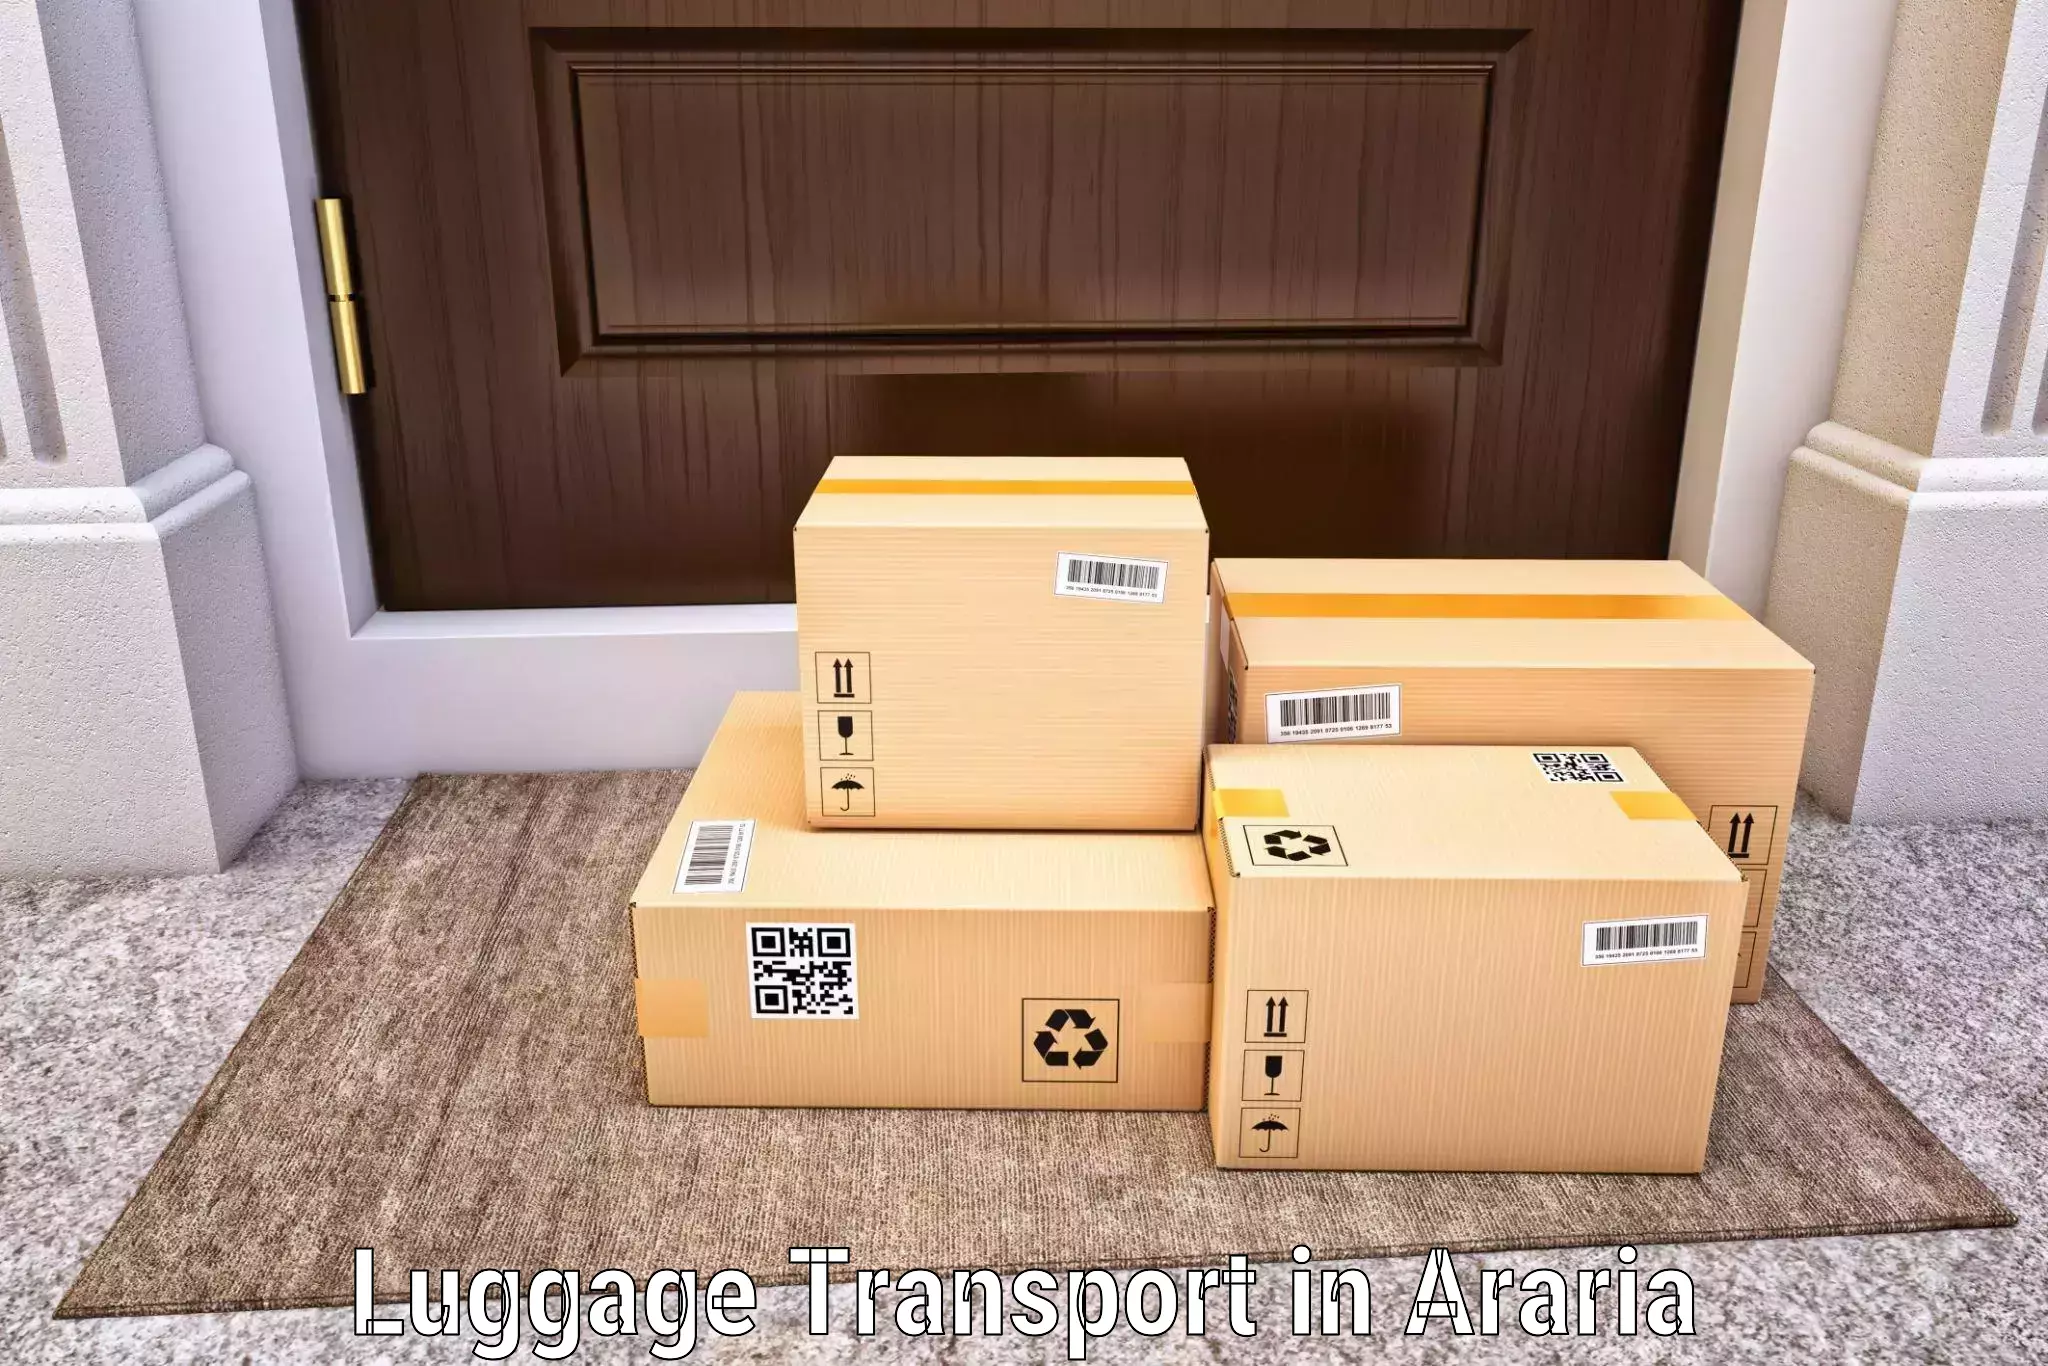 Luggage shipment tracking in Araria